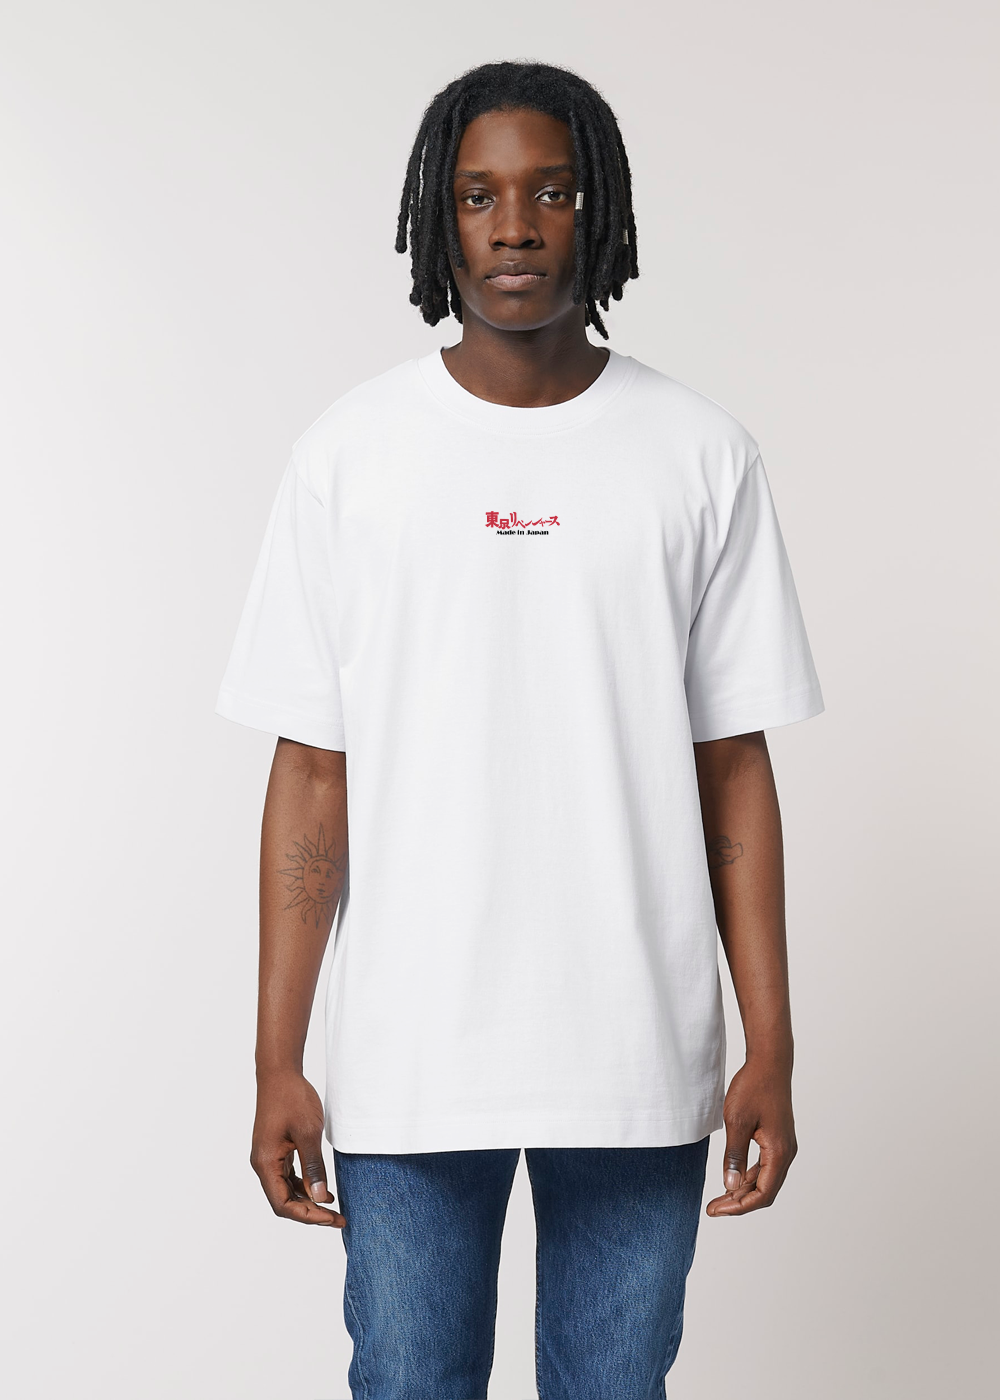 MADE IN JAPAN - MADE IN TOKYO® WHITE T-SHIRT